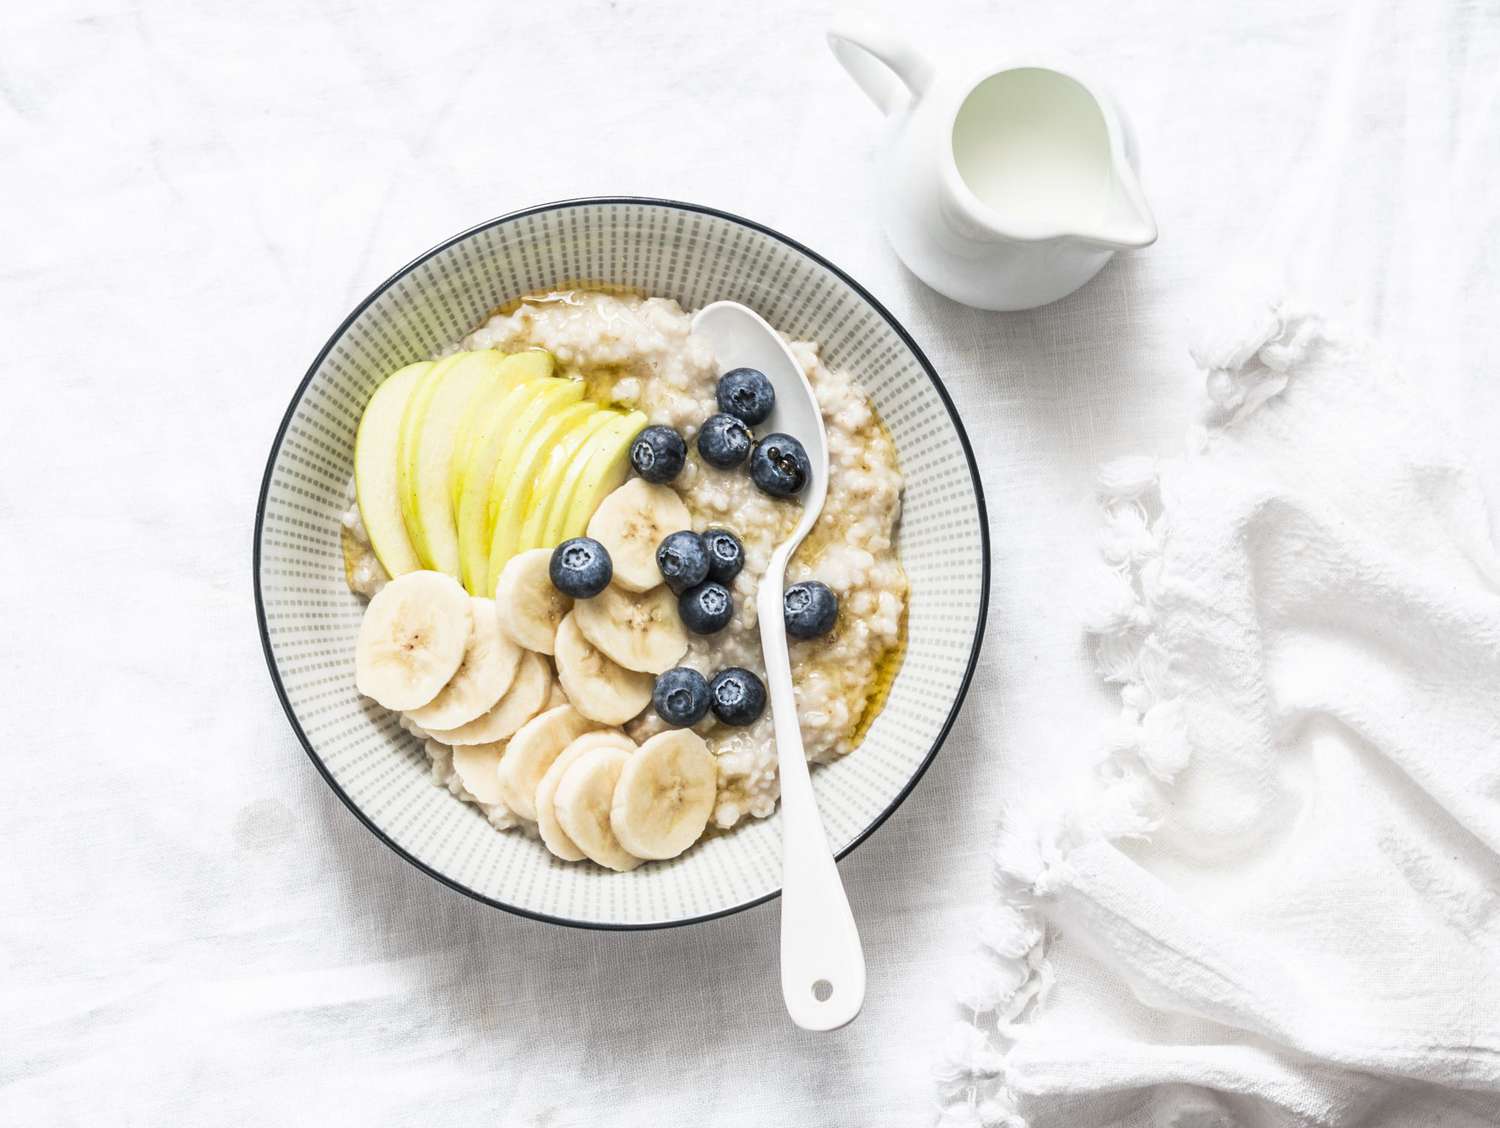 Oats breakfast coconut milk porridge with apple, banana, blueberry and honey on a light background, top view. Vegetarian healthy food